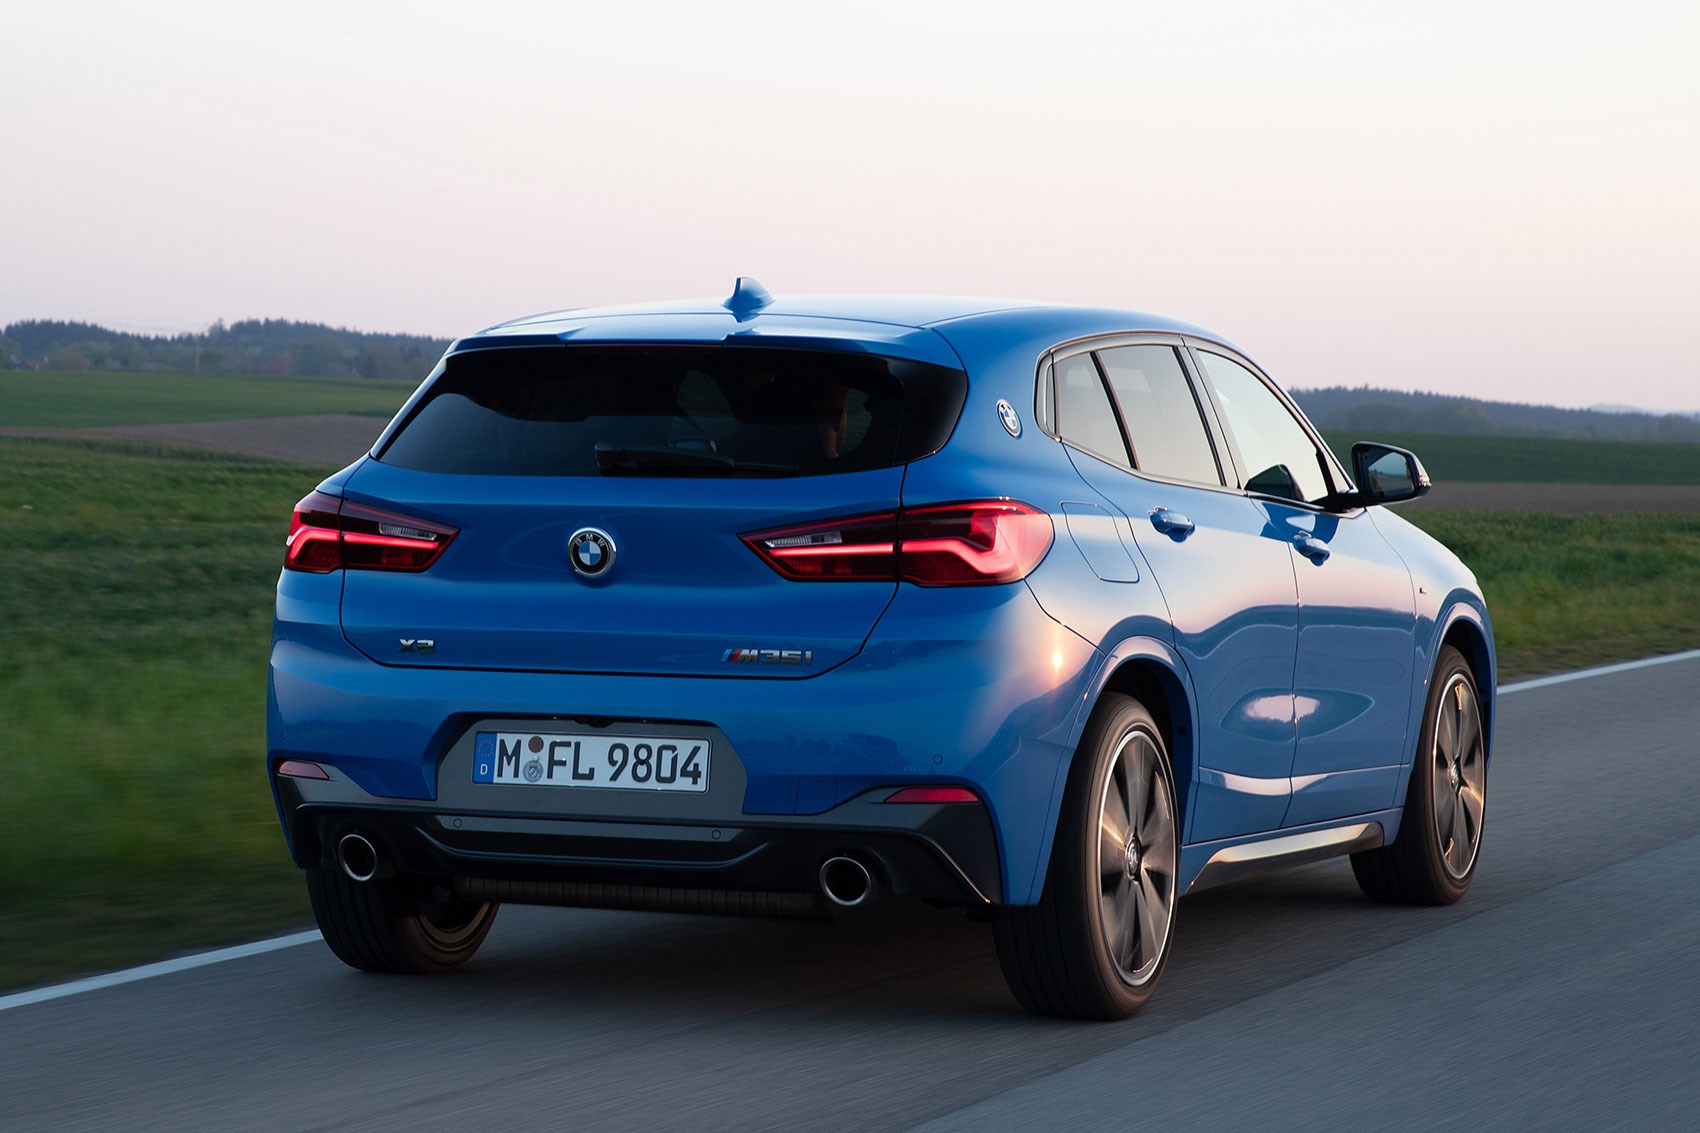 BMW X2 M35i: UK prices and specs from £43,315